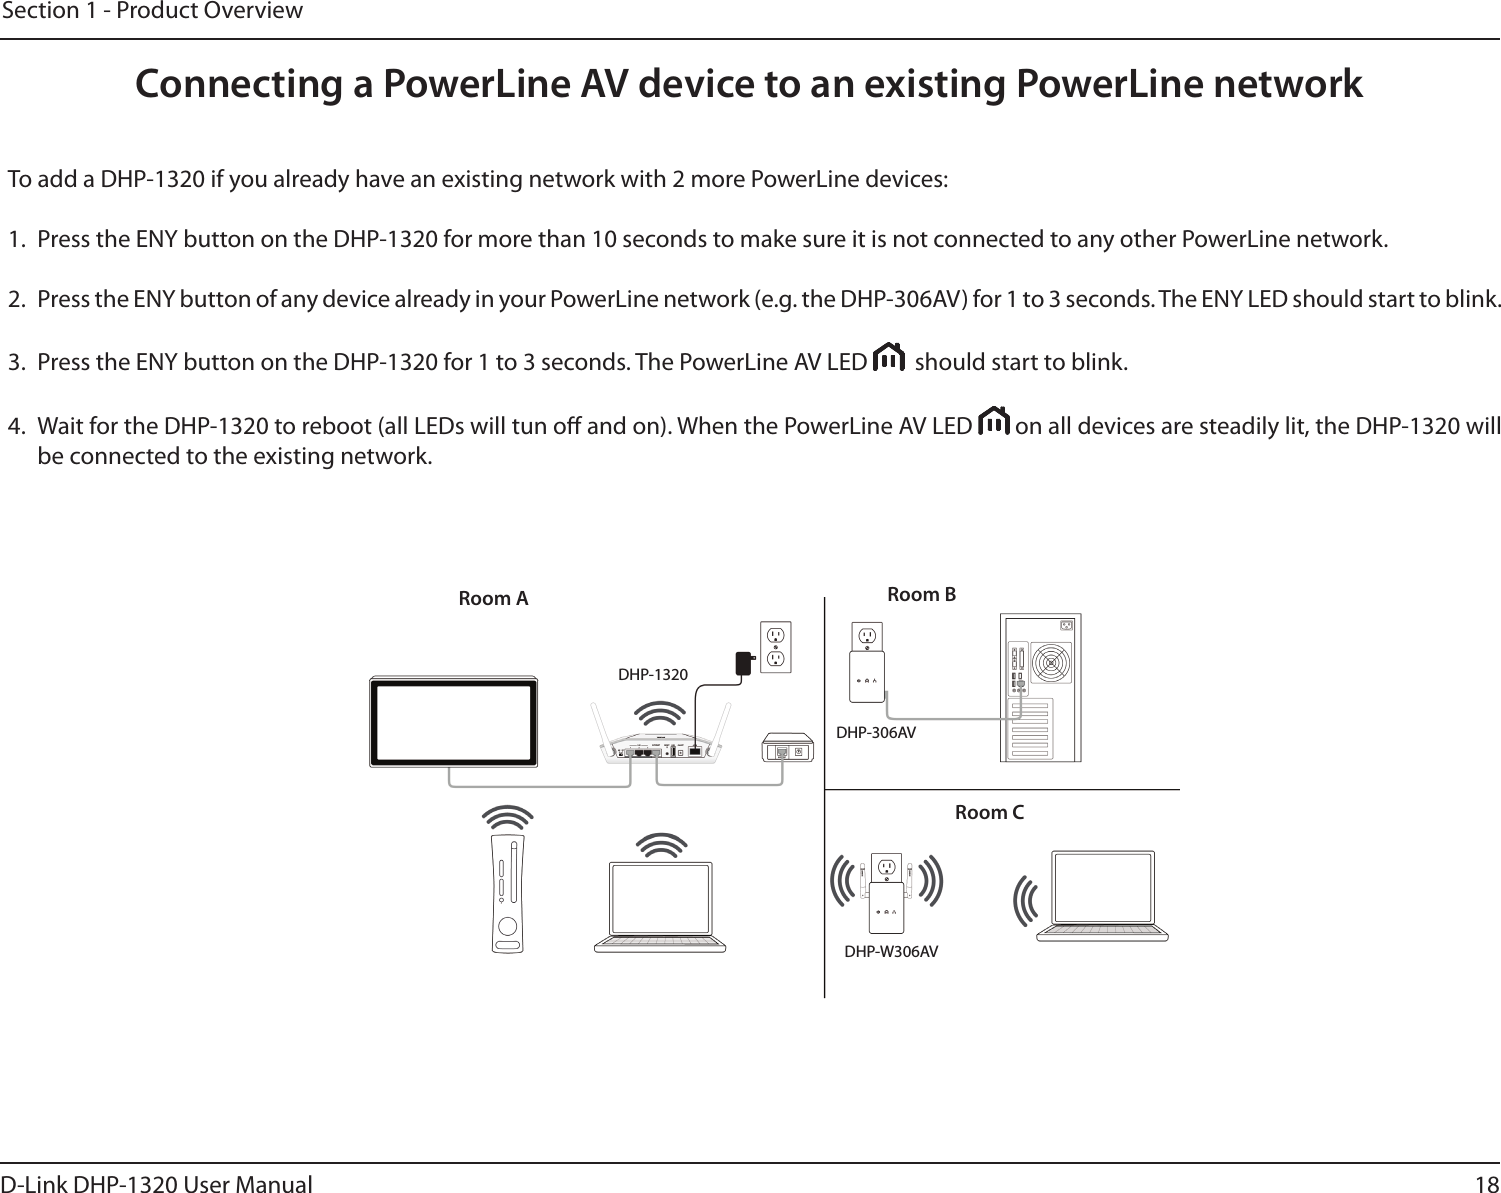 18D-Link DHP-1320 User ManualSection 1 - Product OverviewConnecting a PowerLine AV device to an existing PowerLine networkTo add a DHP-1320 if you already have an existing network with 2 more PowerLine devices:1.  Press the ENY button on the DHP-1320 for more than 10 seconds to make sure it is not connected to any other PowerLine network.2.  Press the ENY button of any device already in your PowerLine network (e.g. the DHP-306AV) for 1 to 3 seconds. The ENY LED should start to blink.3.  Press the ENY button on the DHP-1320 for 1 to 3 seconds. The PowerLine AV LED    should start to blink.4.  Wait for the DHP-1320 to reboot (all LEDs will tun o and on). When the PowerLine AV LED   on all devices are steadily lit, the DHP-1320 will be connected to the existing network. Room BRoom ARoom CDHP-W306AVDHP-1320DHP-306AV